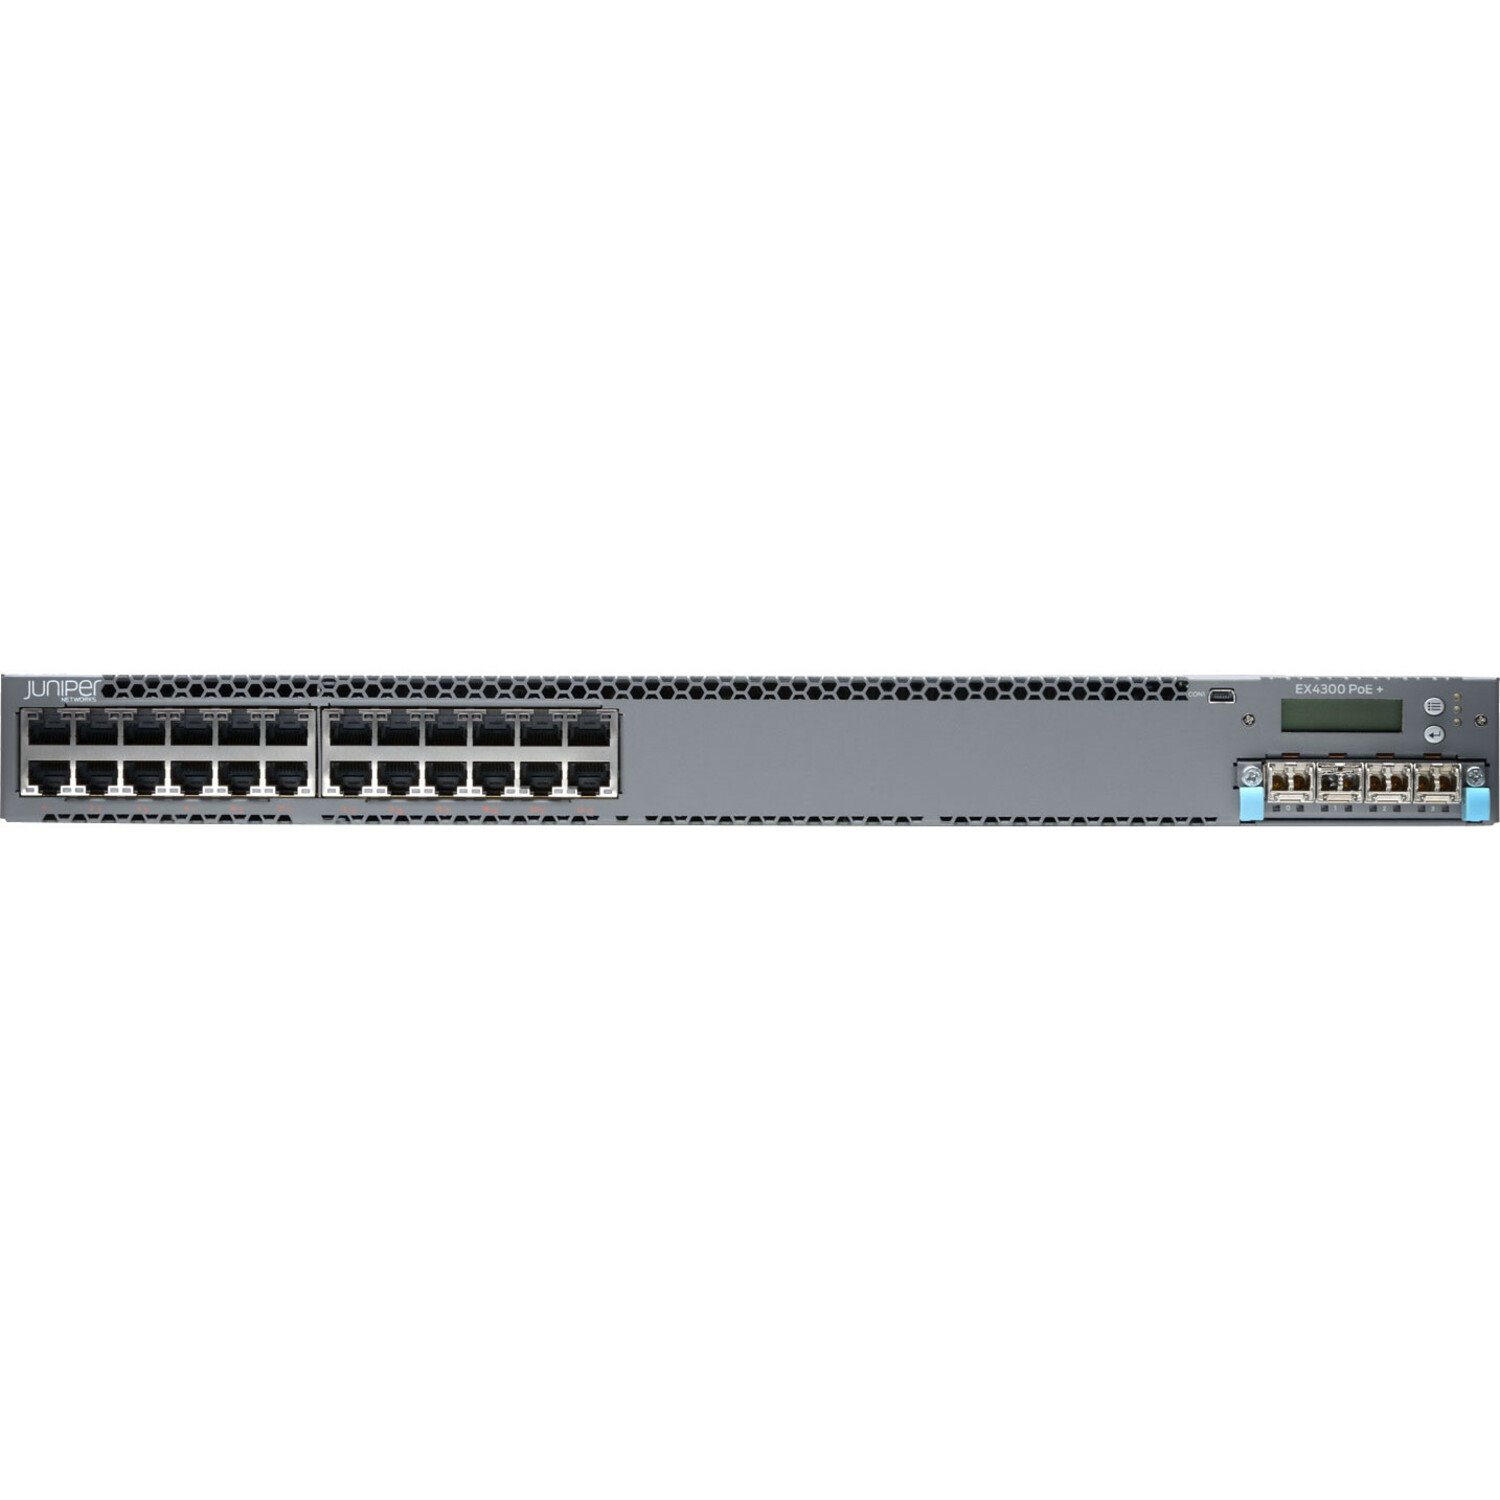 Juniper EX4300 EX4300-24P 24 Ports Manageable Layer 3 Switch - 10/100/1000Base-T